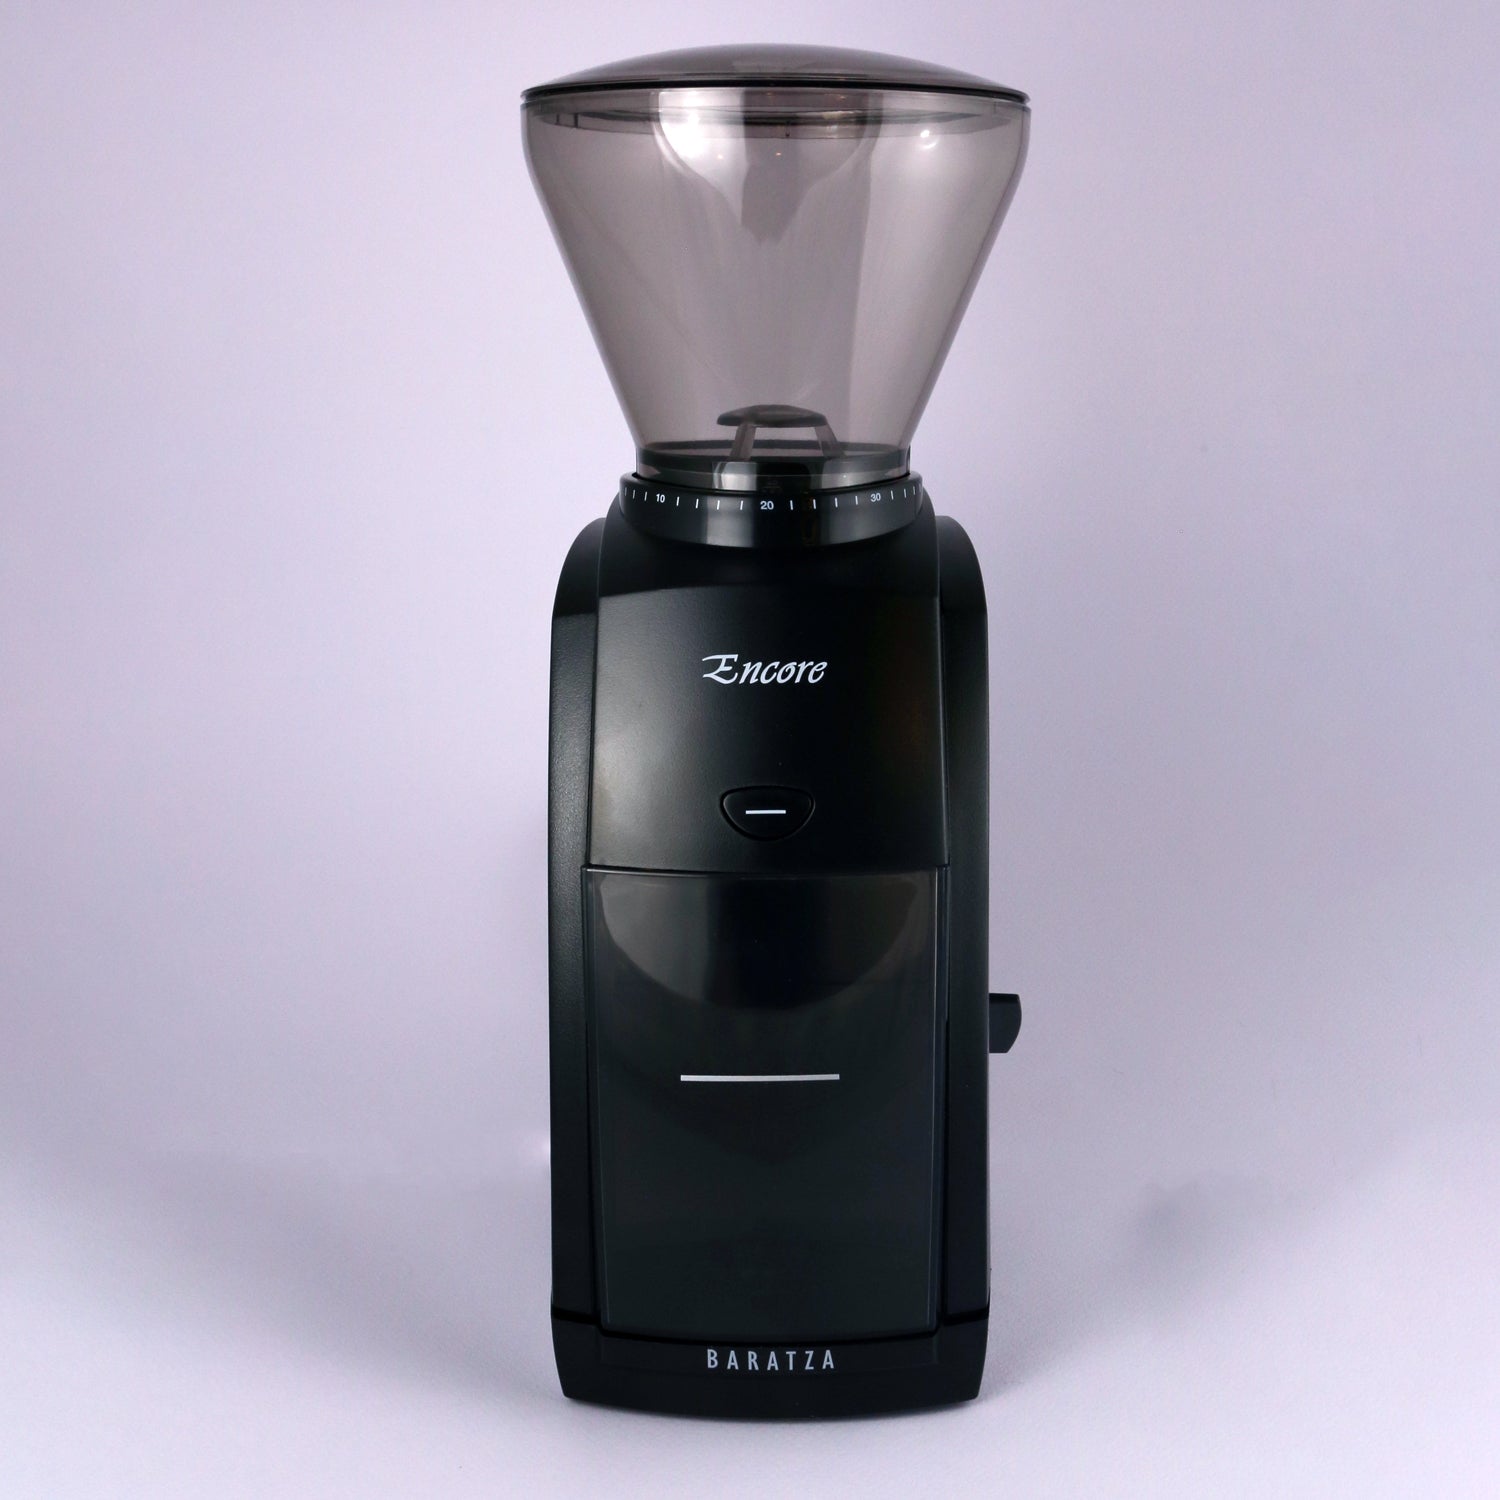 A black Tandem Baratza Encore Coffee Grinder with a transparent bean hopper on top, positioned against a neutral gray background.